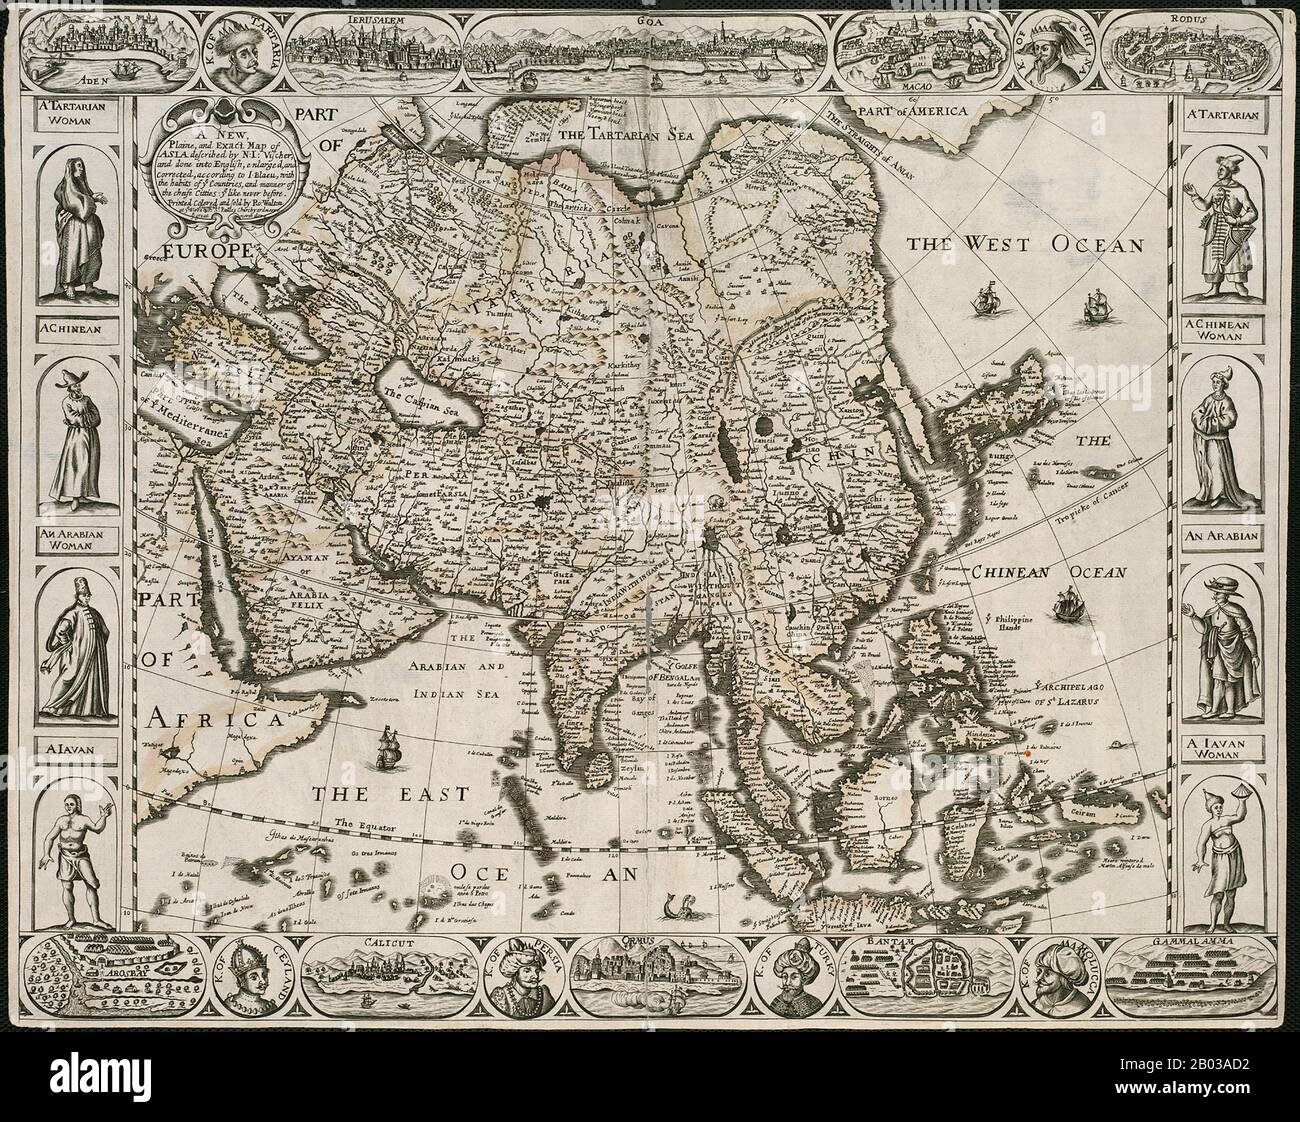 Nicolaes Visscher I (1618-1679) was a Dutch cartographer, engraver and publisher, the son of famed Dutch Golden Age draughtsman Claes Janszoon Visscher. He produced various double hemisphere maps, often working alongside his son, Nicolaes Visscher II, who continued the family tradition after his death. Stock Photo